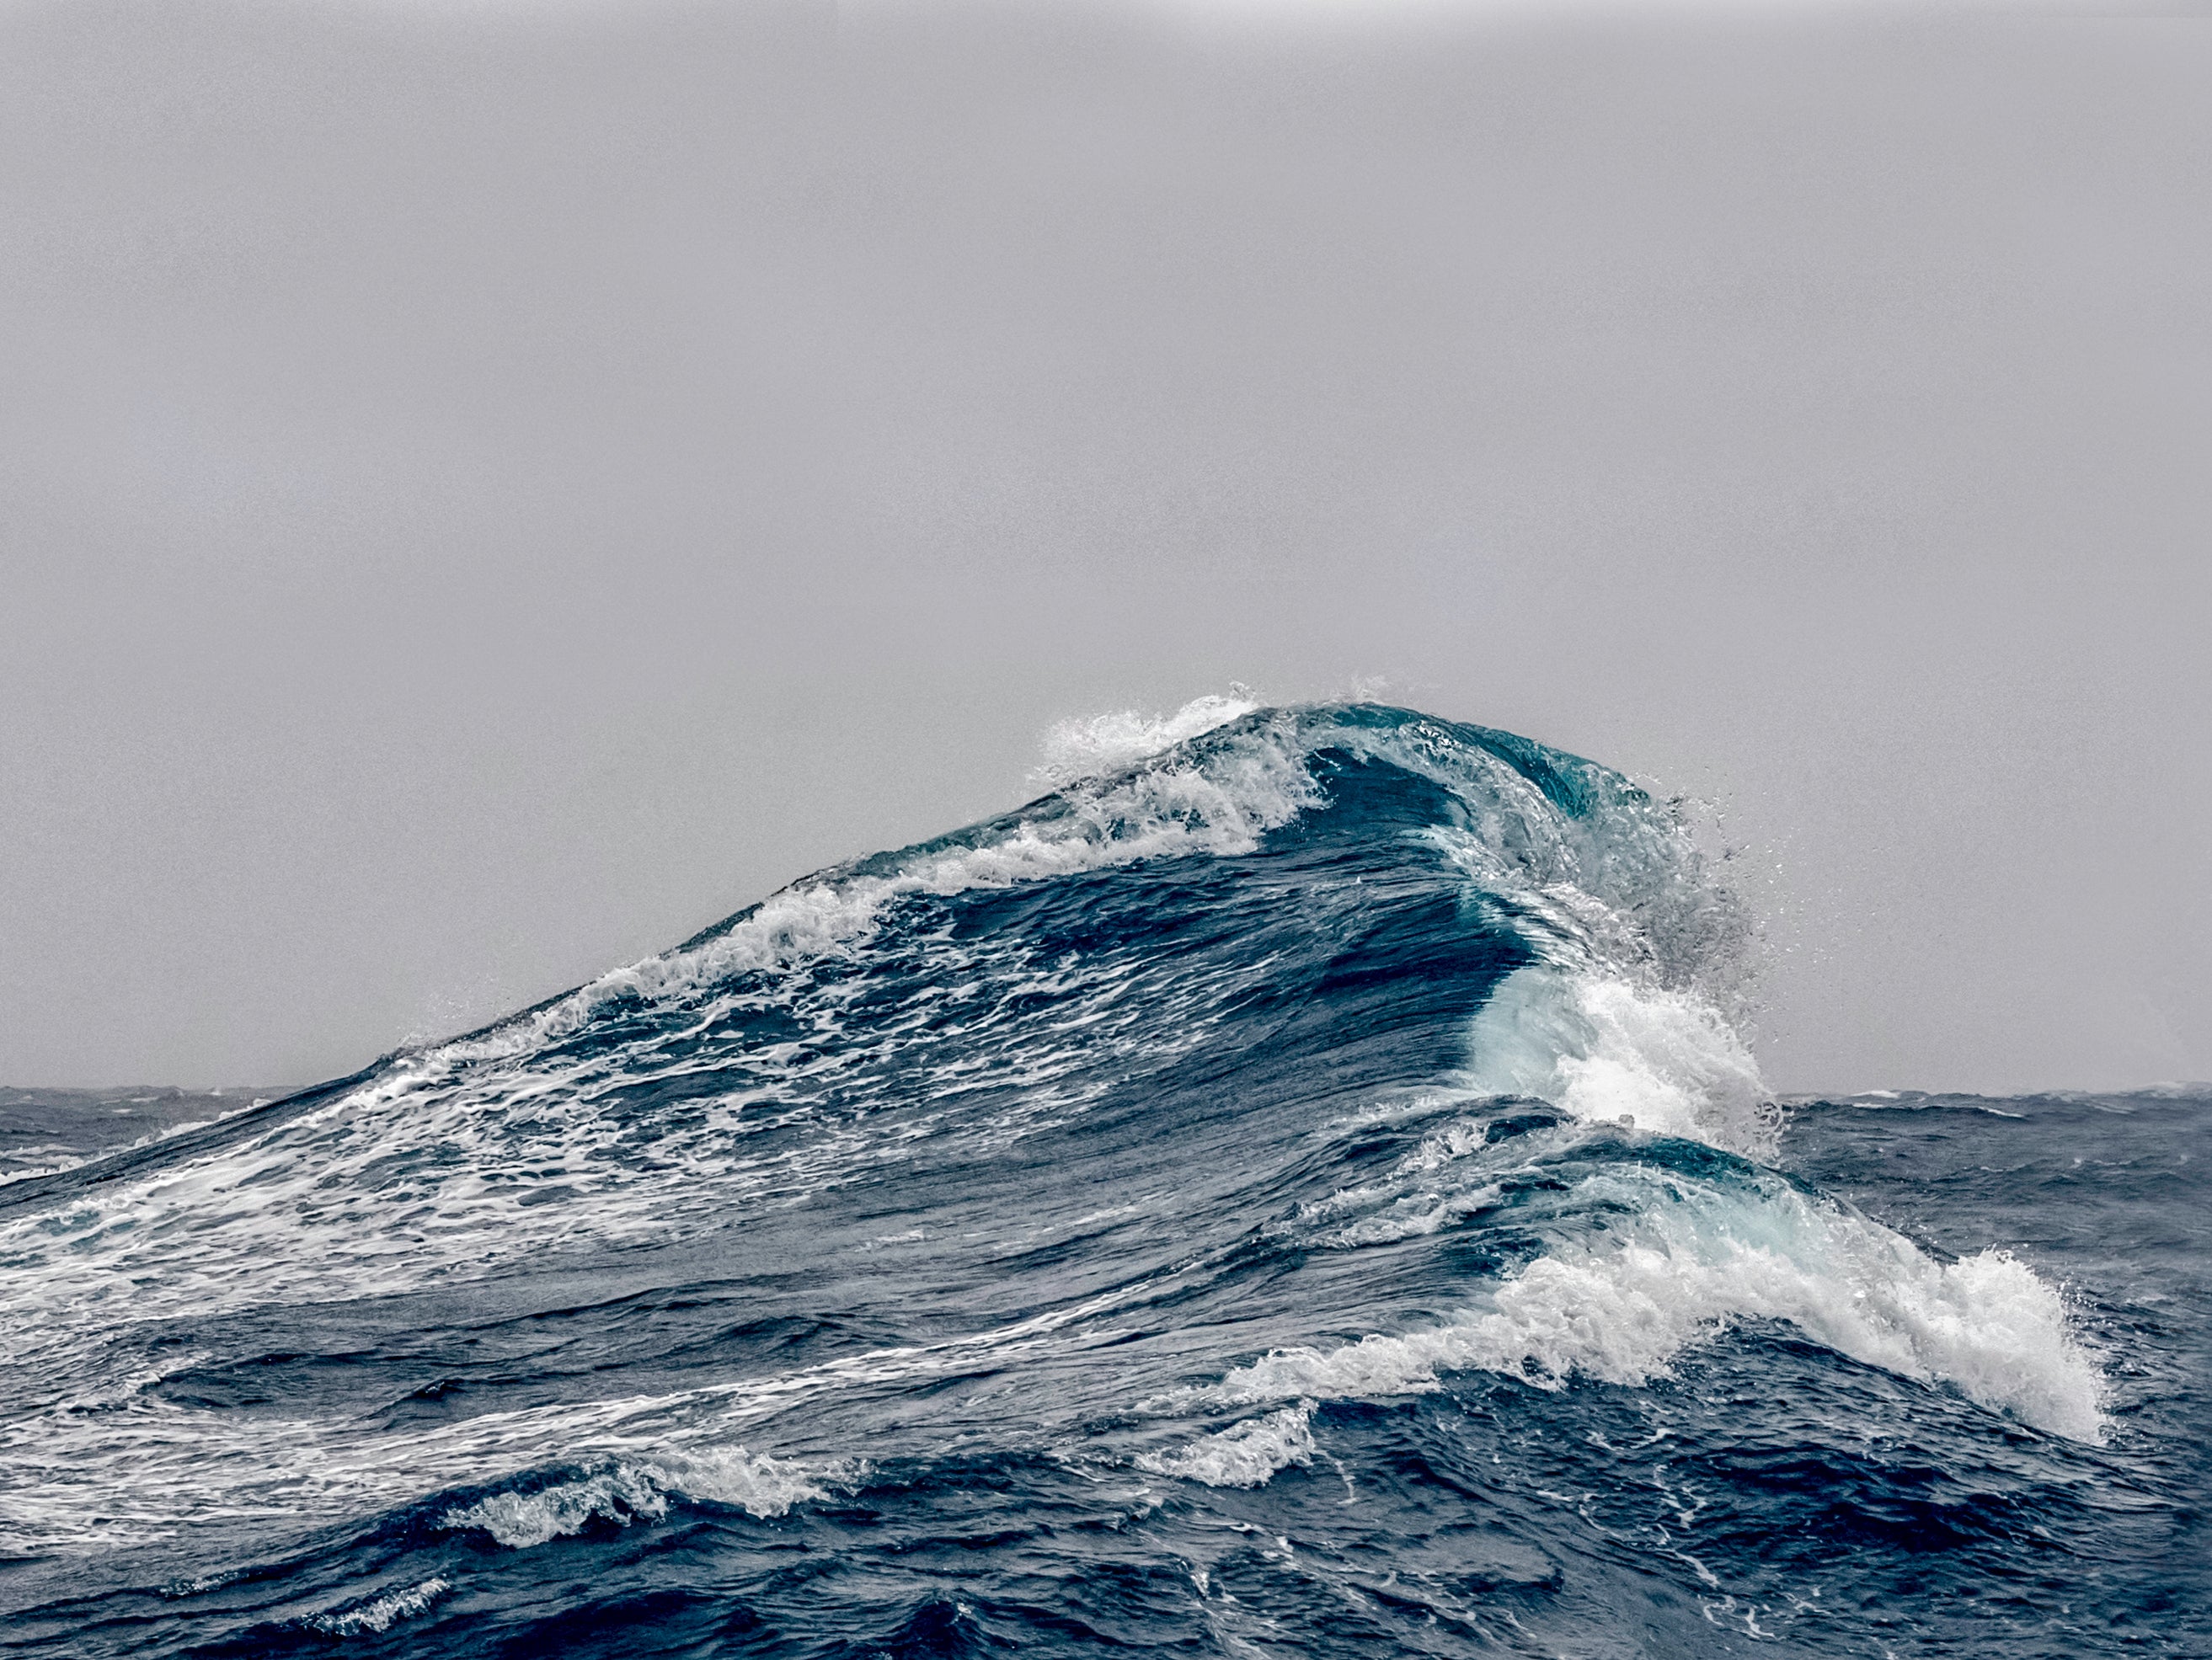 In shallow water, the water on top of a wave travels faster than the water underneath